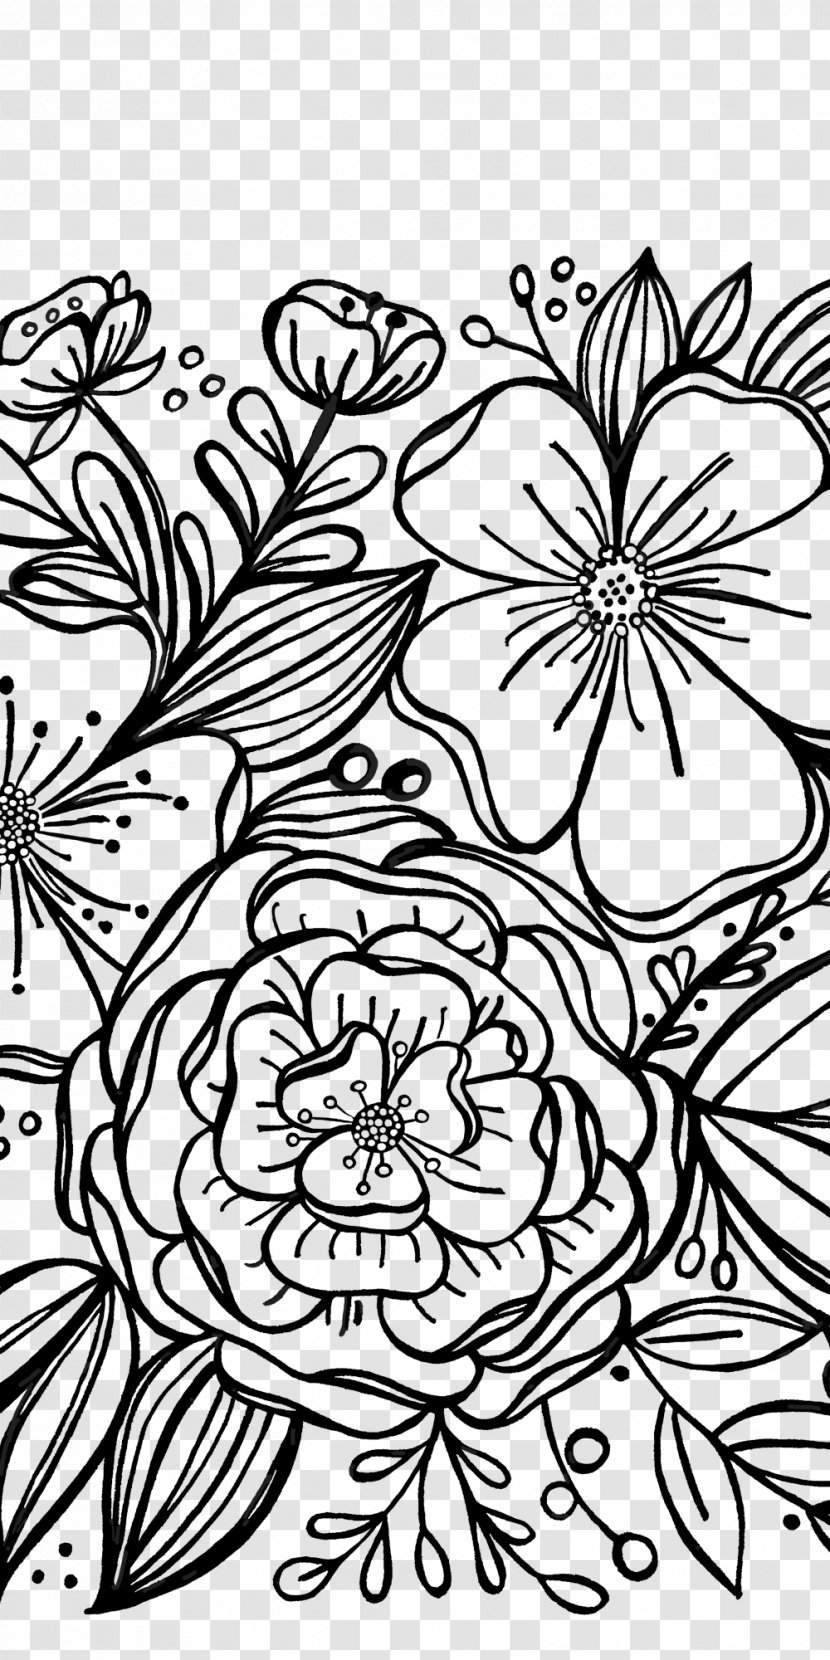 Floral Design Illustration Drawing Clip Art - Photography - Black And White Drawn Flowers Doodle Transparent PNG